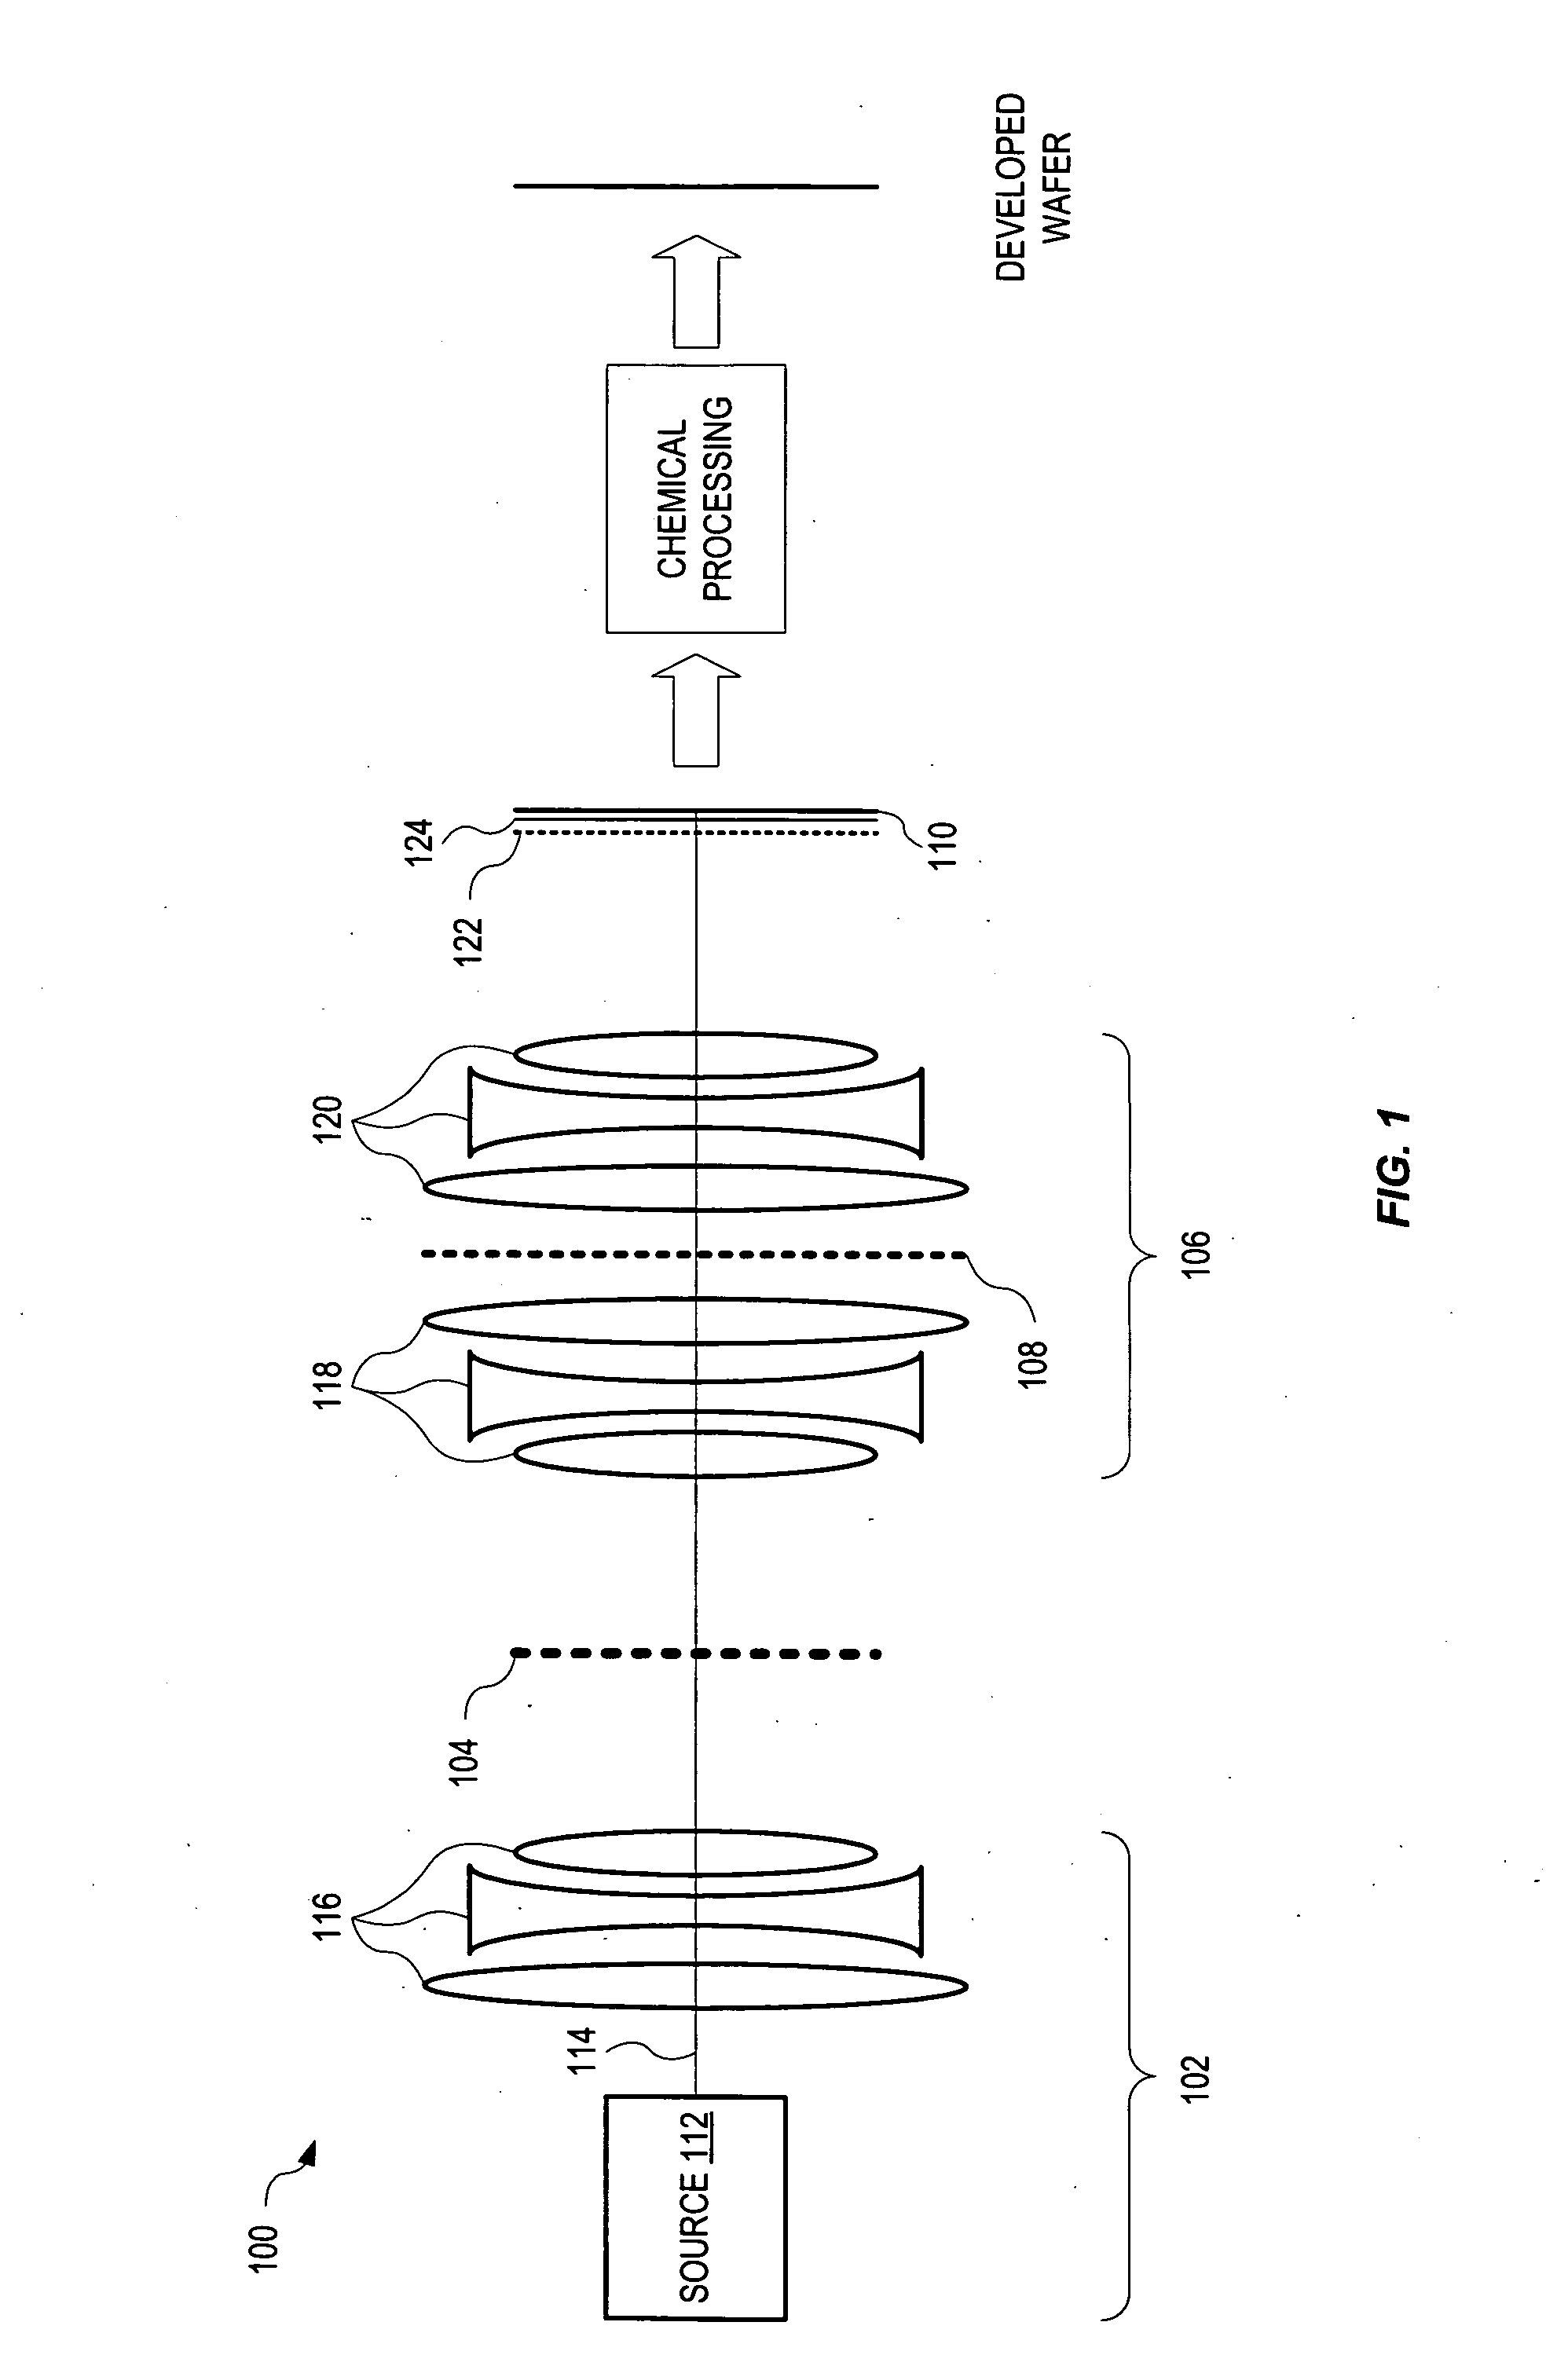 Lithographic systems and methods with extended depth of focus